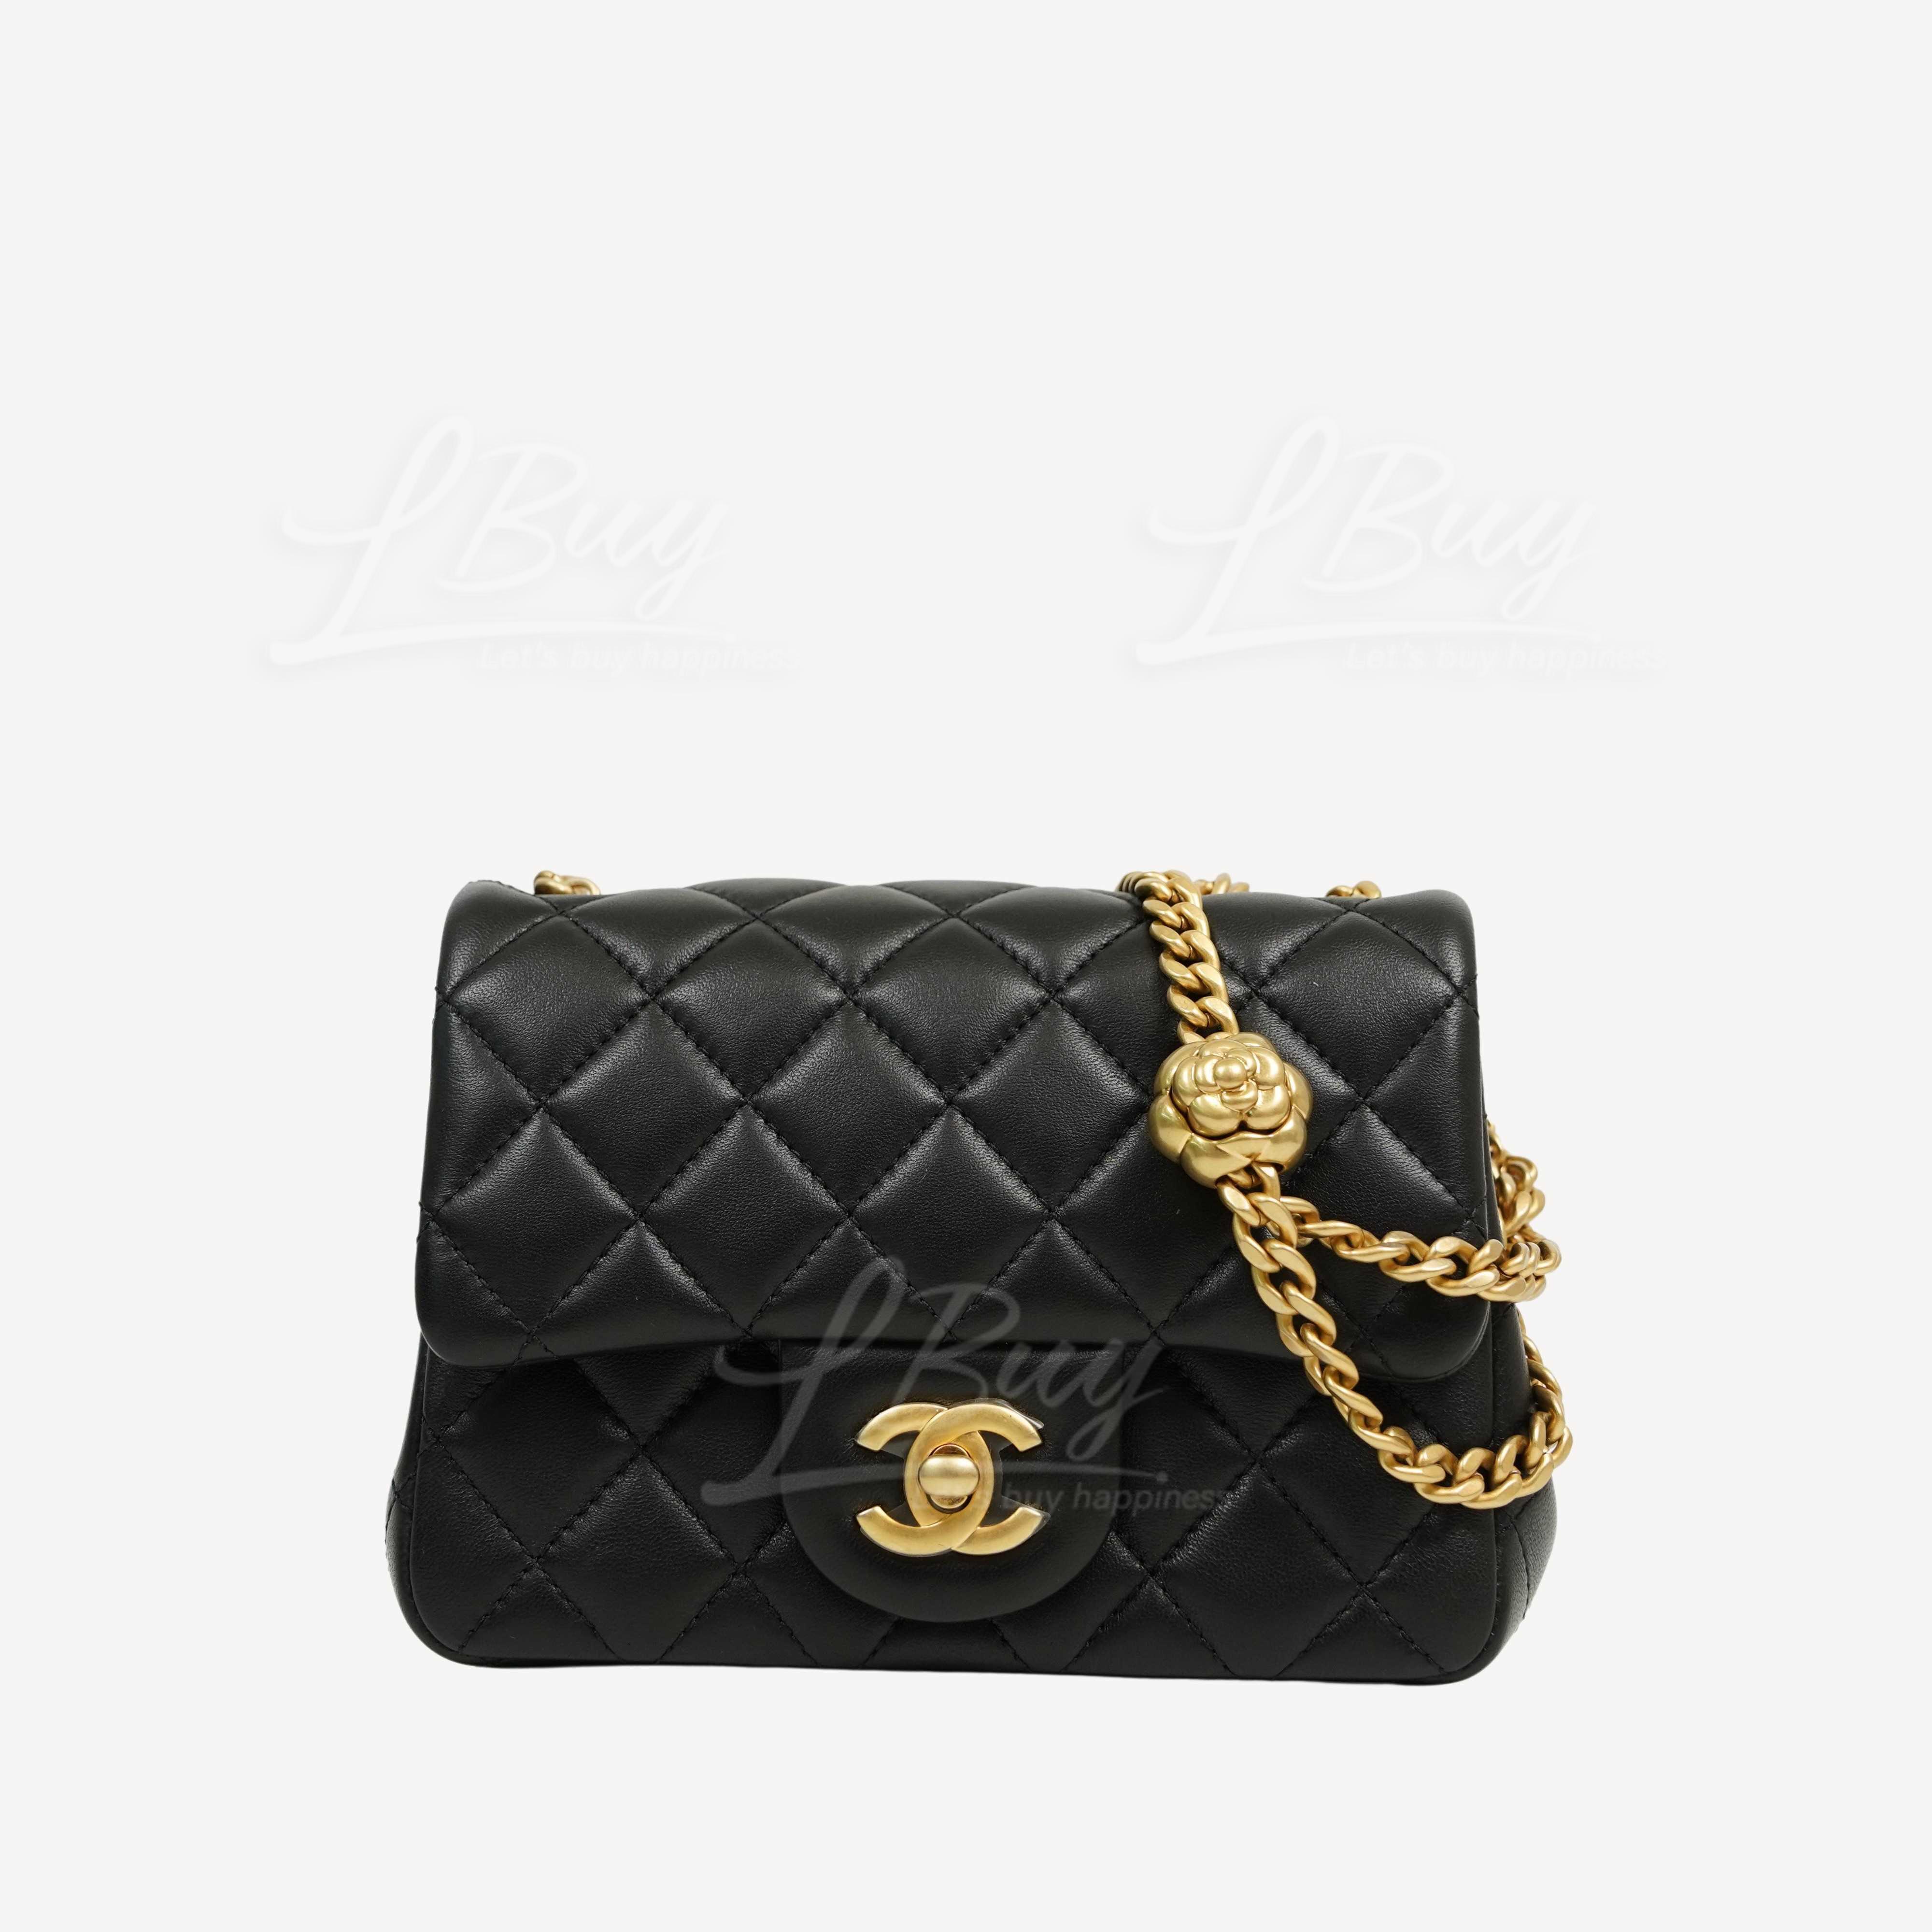 Chanel Camellia Embossed Chain Adjustable 17cm Black Flap Bag Black and Fuchsia AS4040